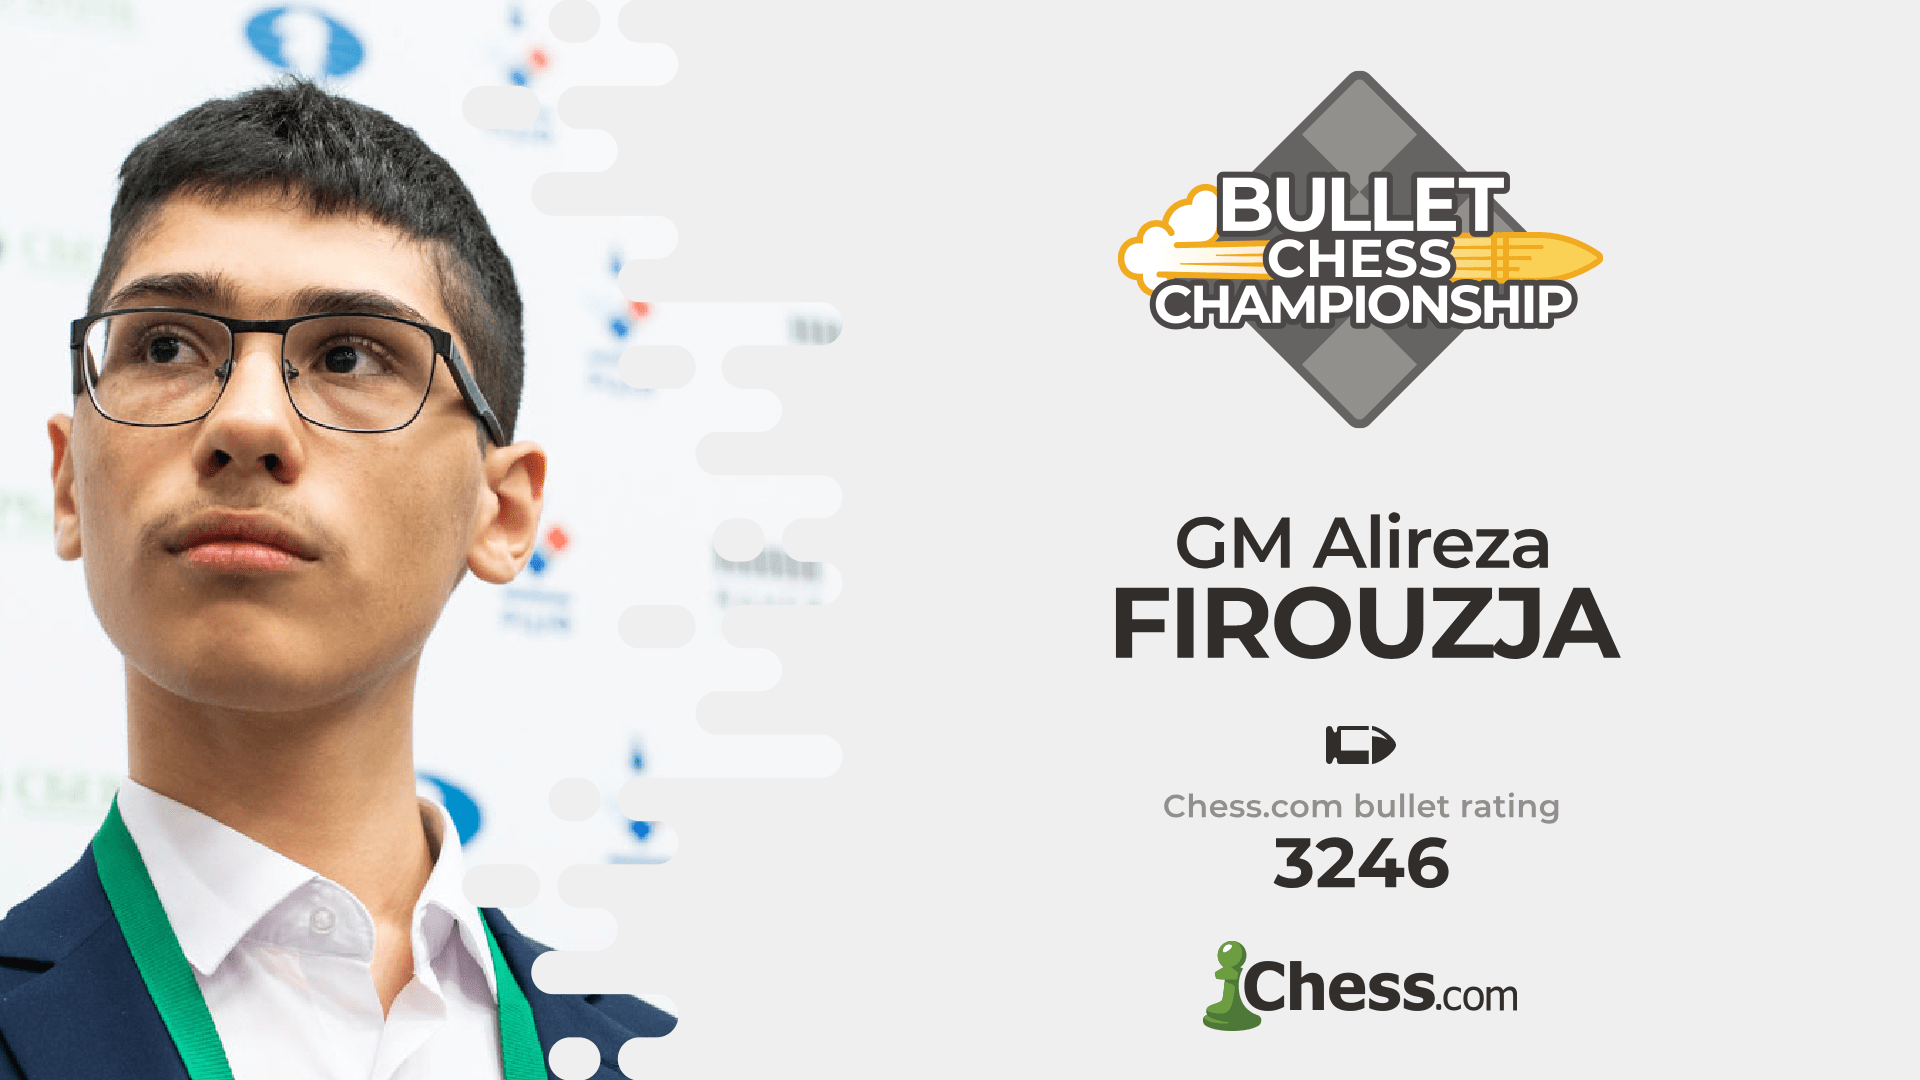 Firouzja Wins 2021 Bullet Chess Championship Presented By SIG